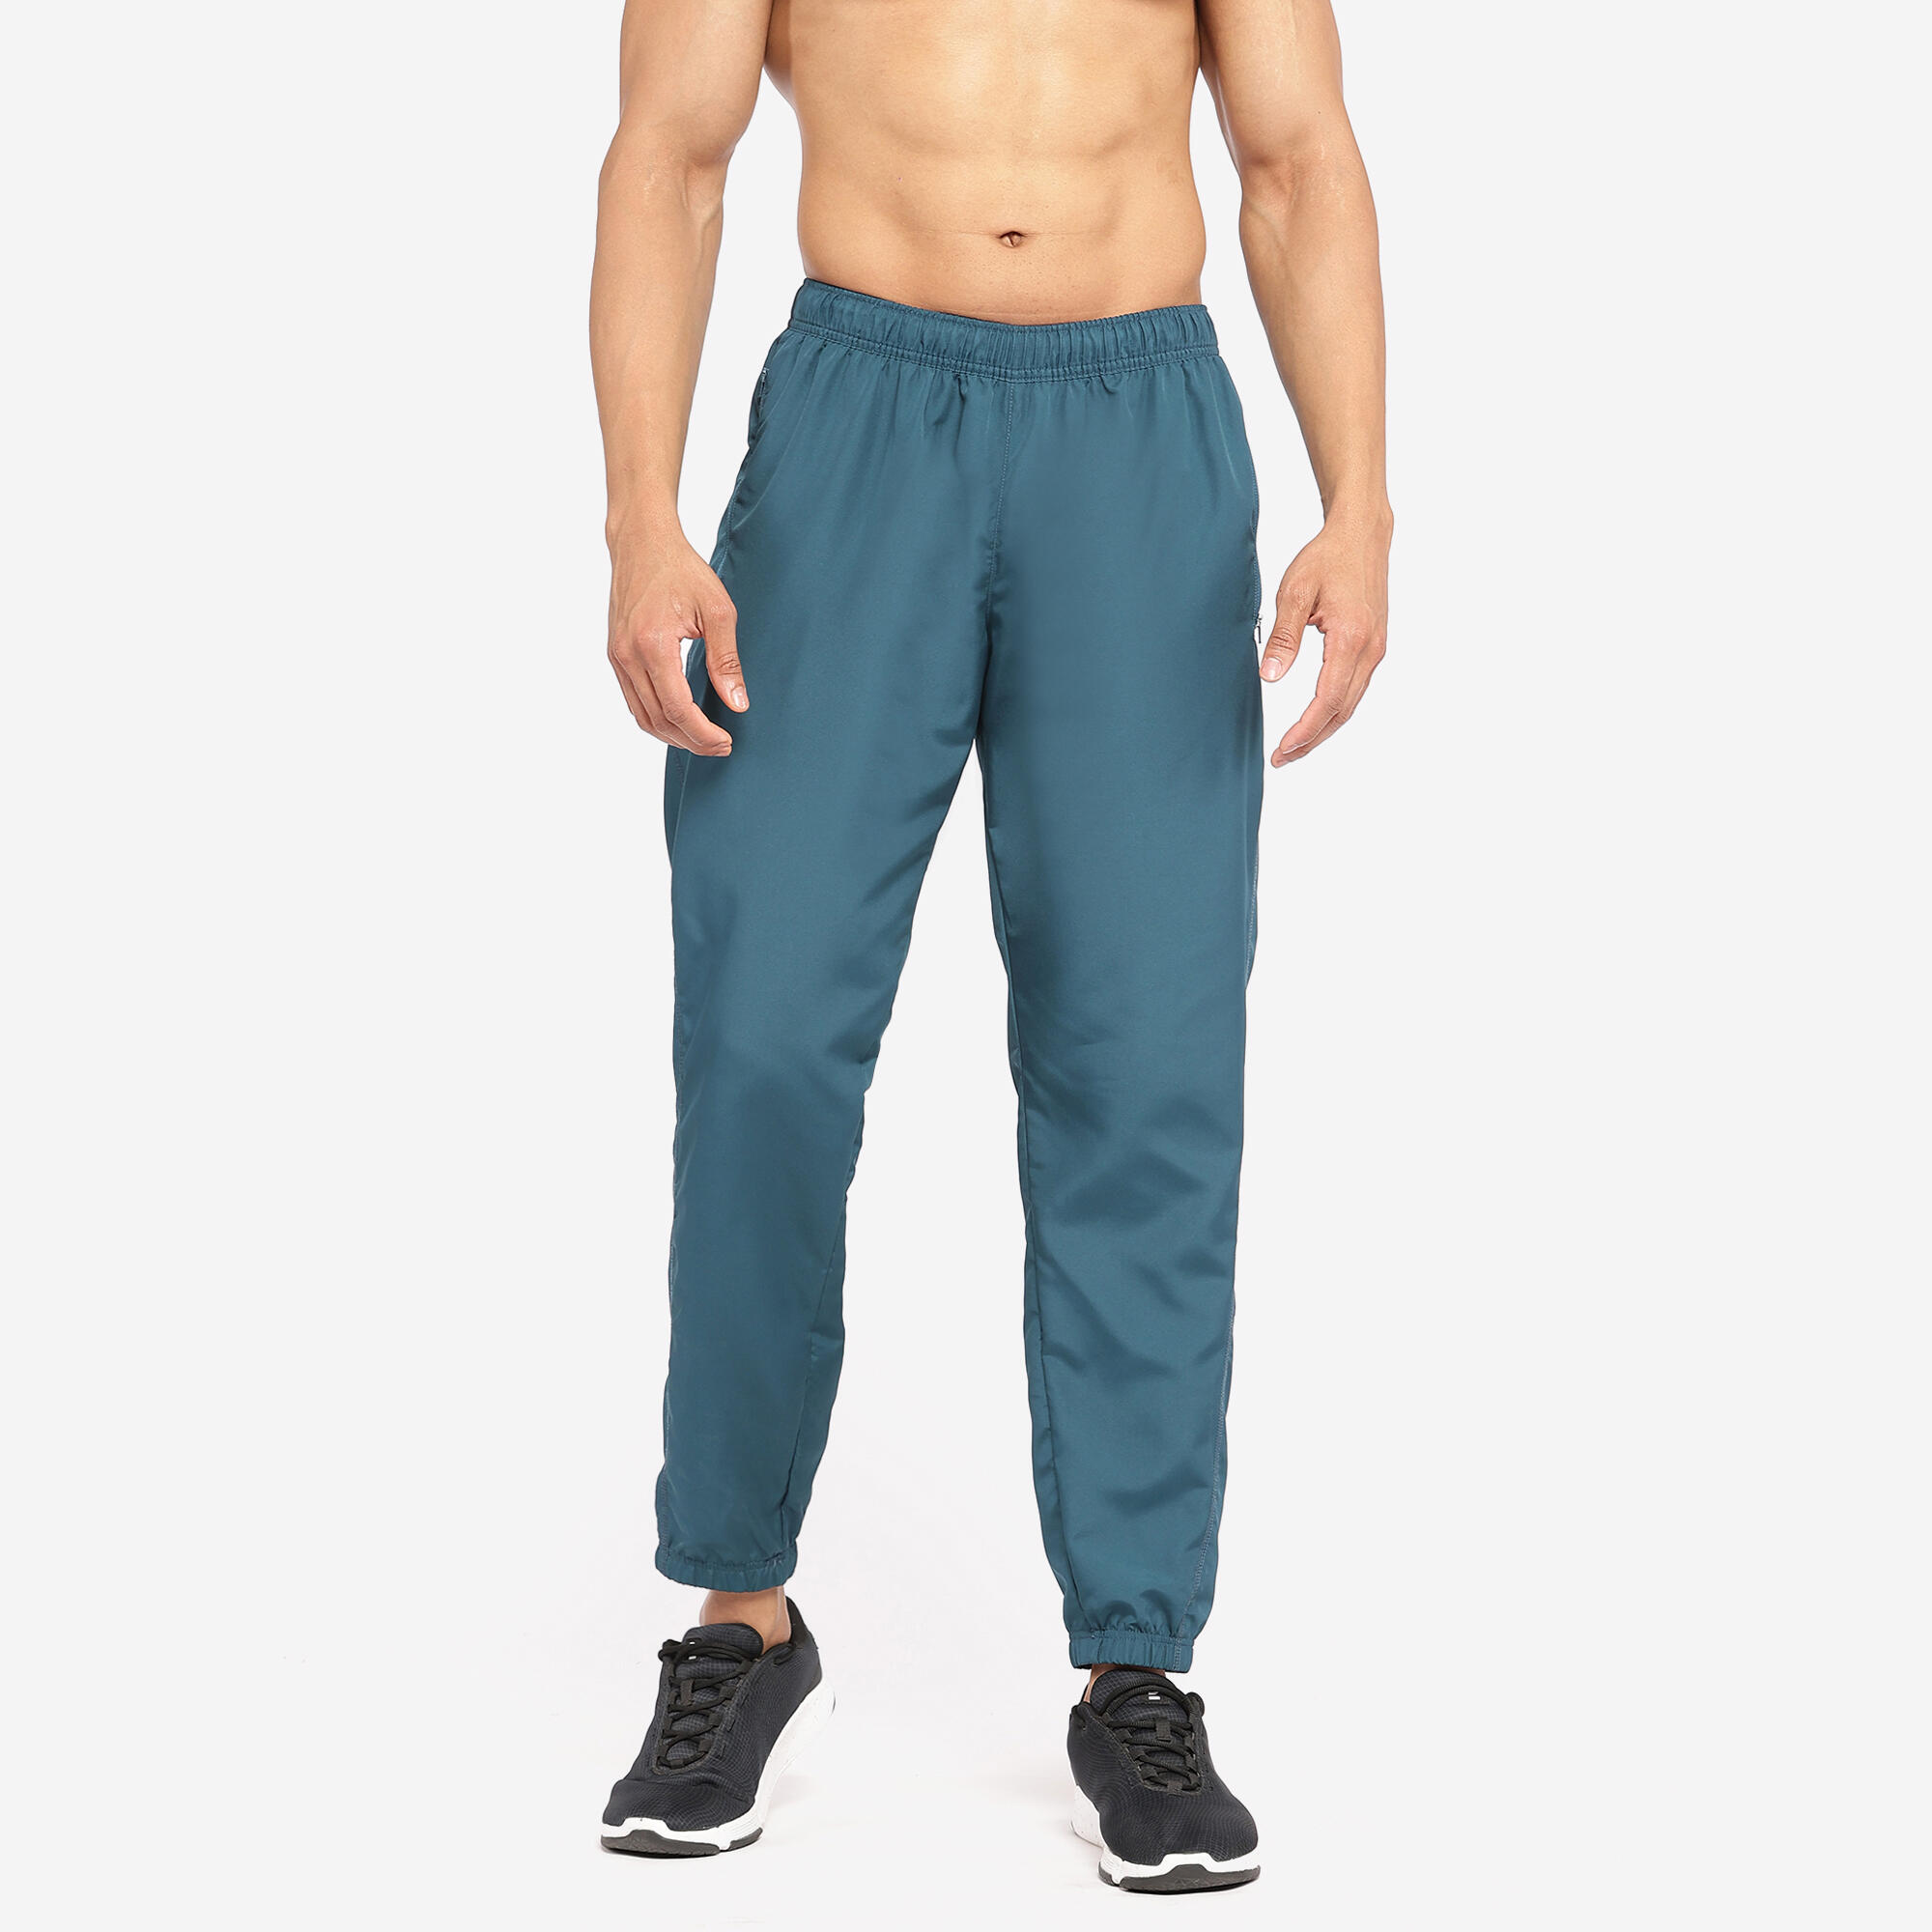 Decathlon | Trackpant | Lower | FLX | MEN'S CRICKET STRAIGHT FIT TROUSER  CTS 500 GREY - YouTube